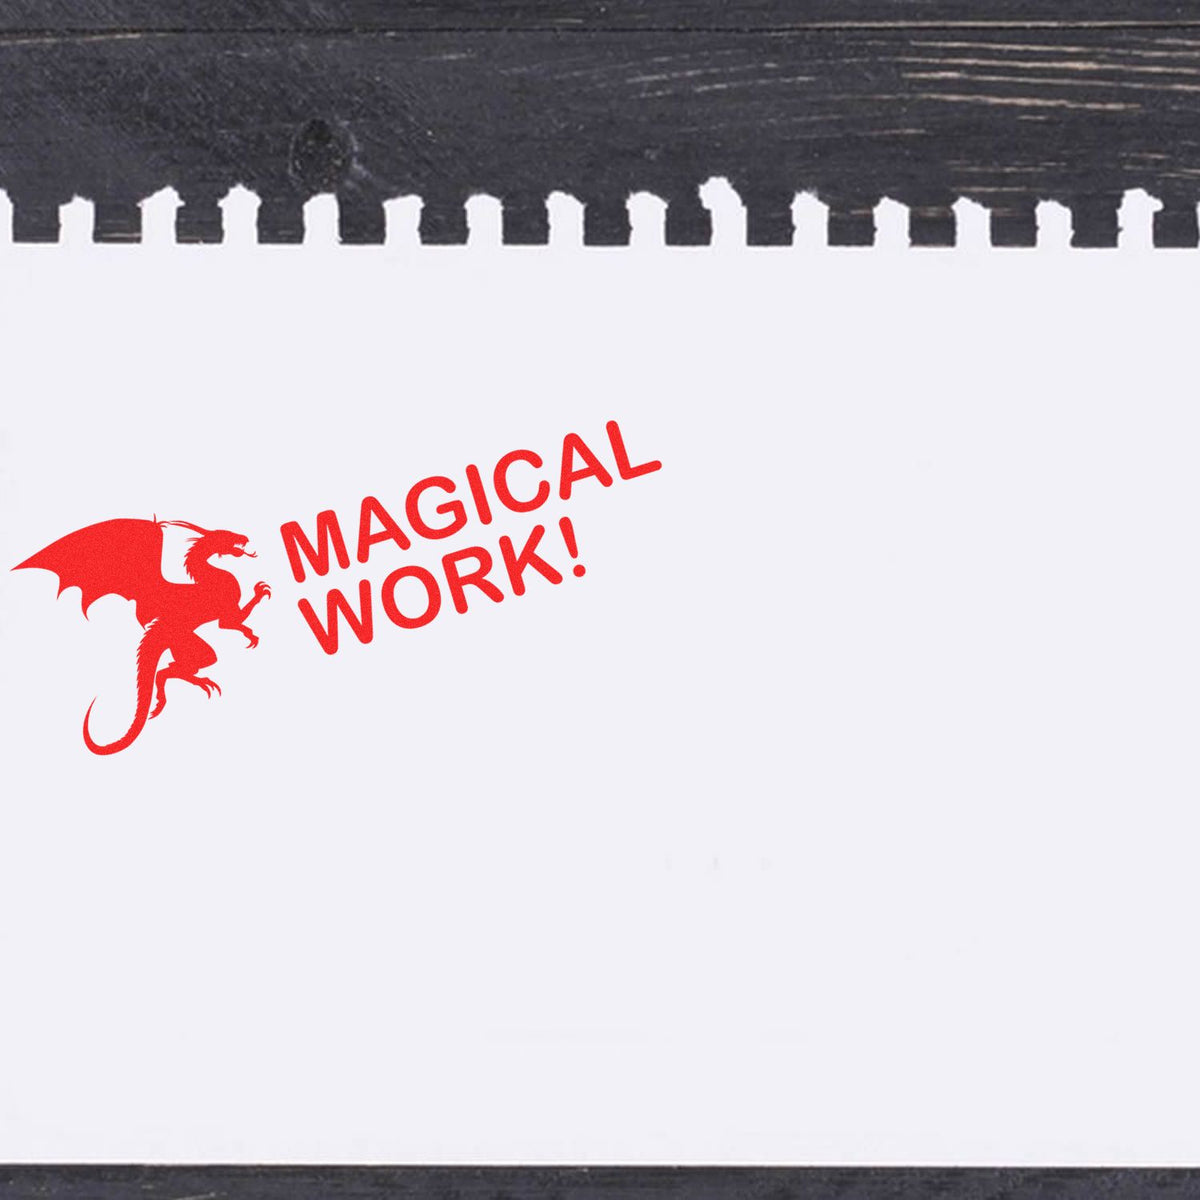 Slim Pre-Inked Dragon Magical Work Stamp In Use Photo